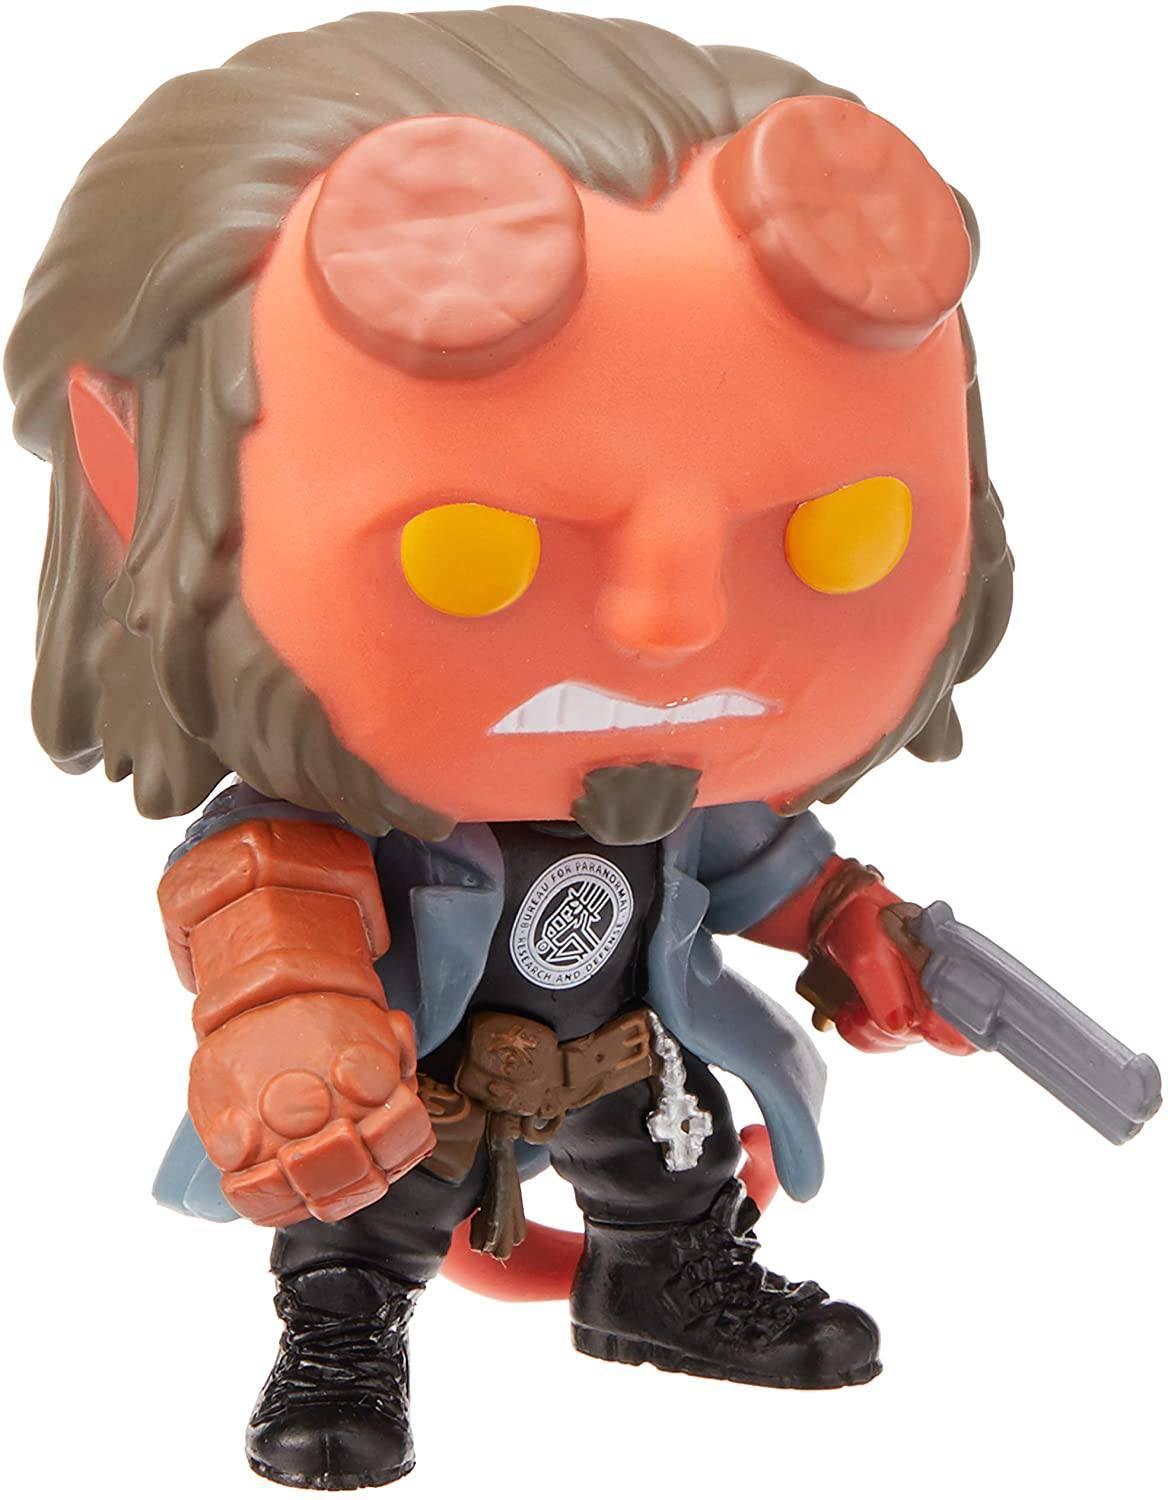 Funko 39079 POP Movies Hellboy with BPRD Tee Collectible Figure, Multicolor - The Card Vault